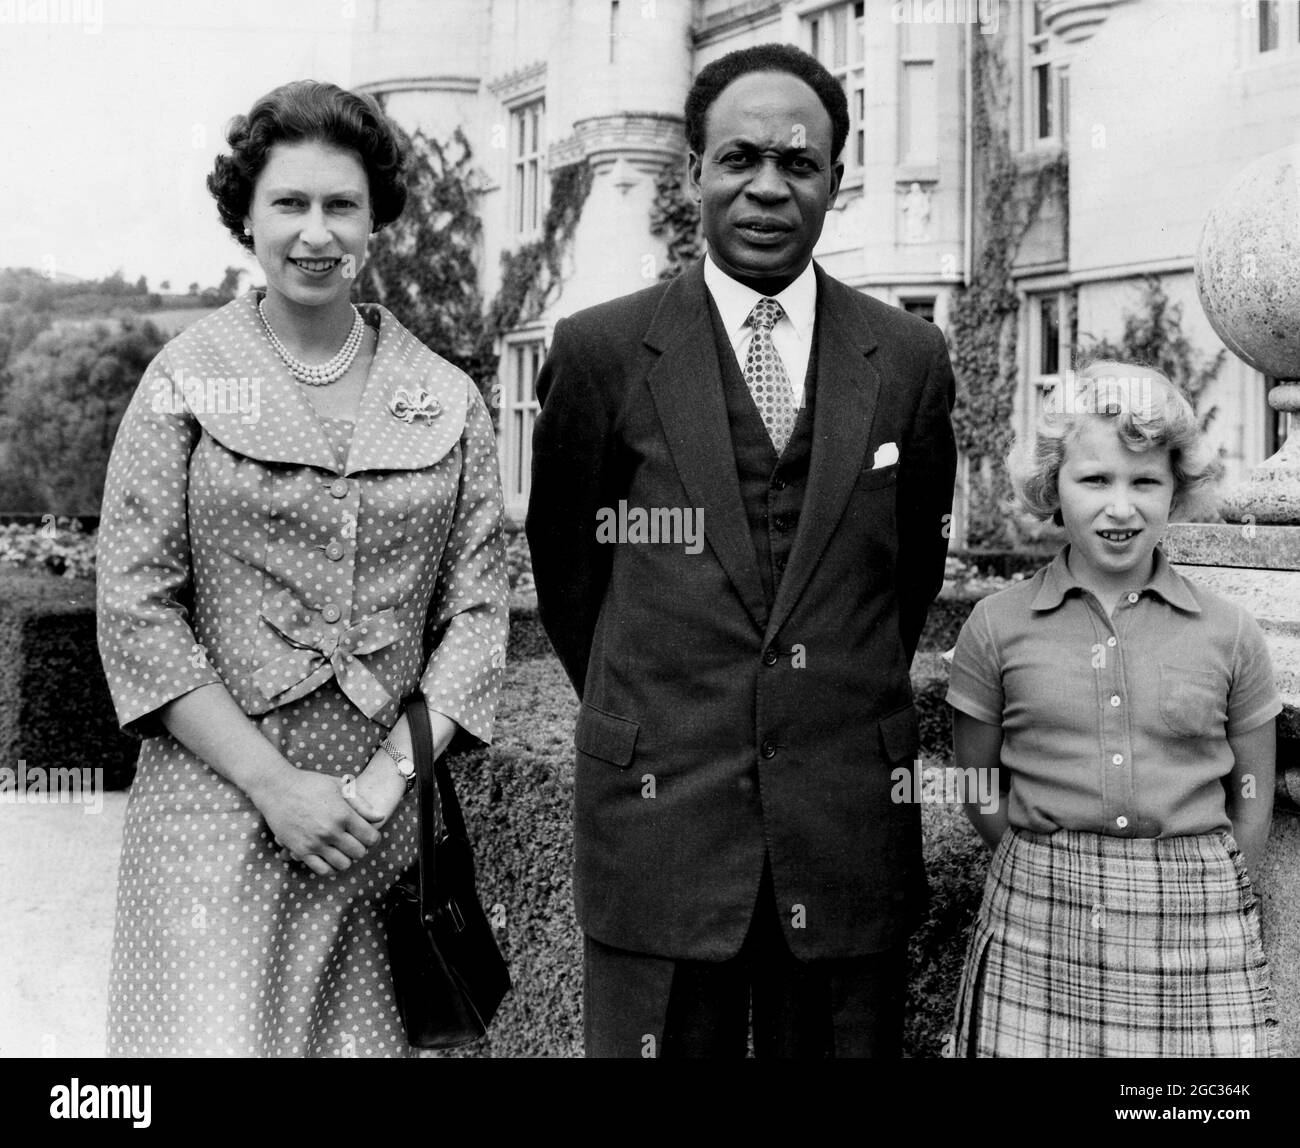 The Prime Minister of Ghana, Dr Nkrumah, yesterday visited Her Majesty the Queen and the Duke of Edinburgh who are now on holiday with their children, at Balmoral Castle. He had gone to discuss possible future arrangements for a royal tour of his country - the visit arranged for this autumn having been cancelled because of the impending birth of a baby to Her Majesty. On the occasion of his visit he was made a privy councillor by the Queen. This picture shows Dr Nkrumah with her majesty the Queen and Princess Anne. August 1959 Stock Photo